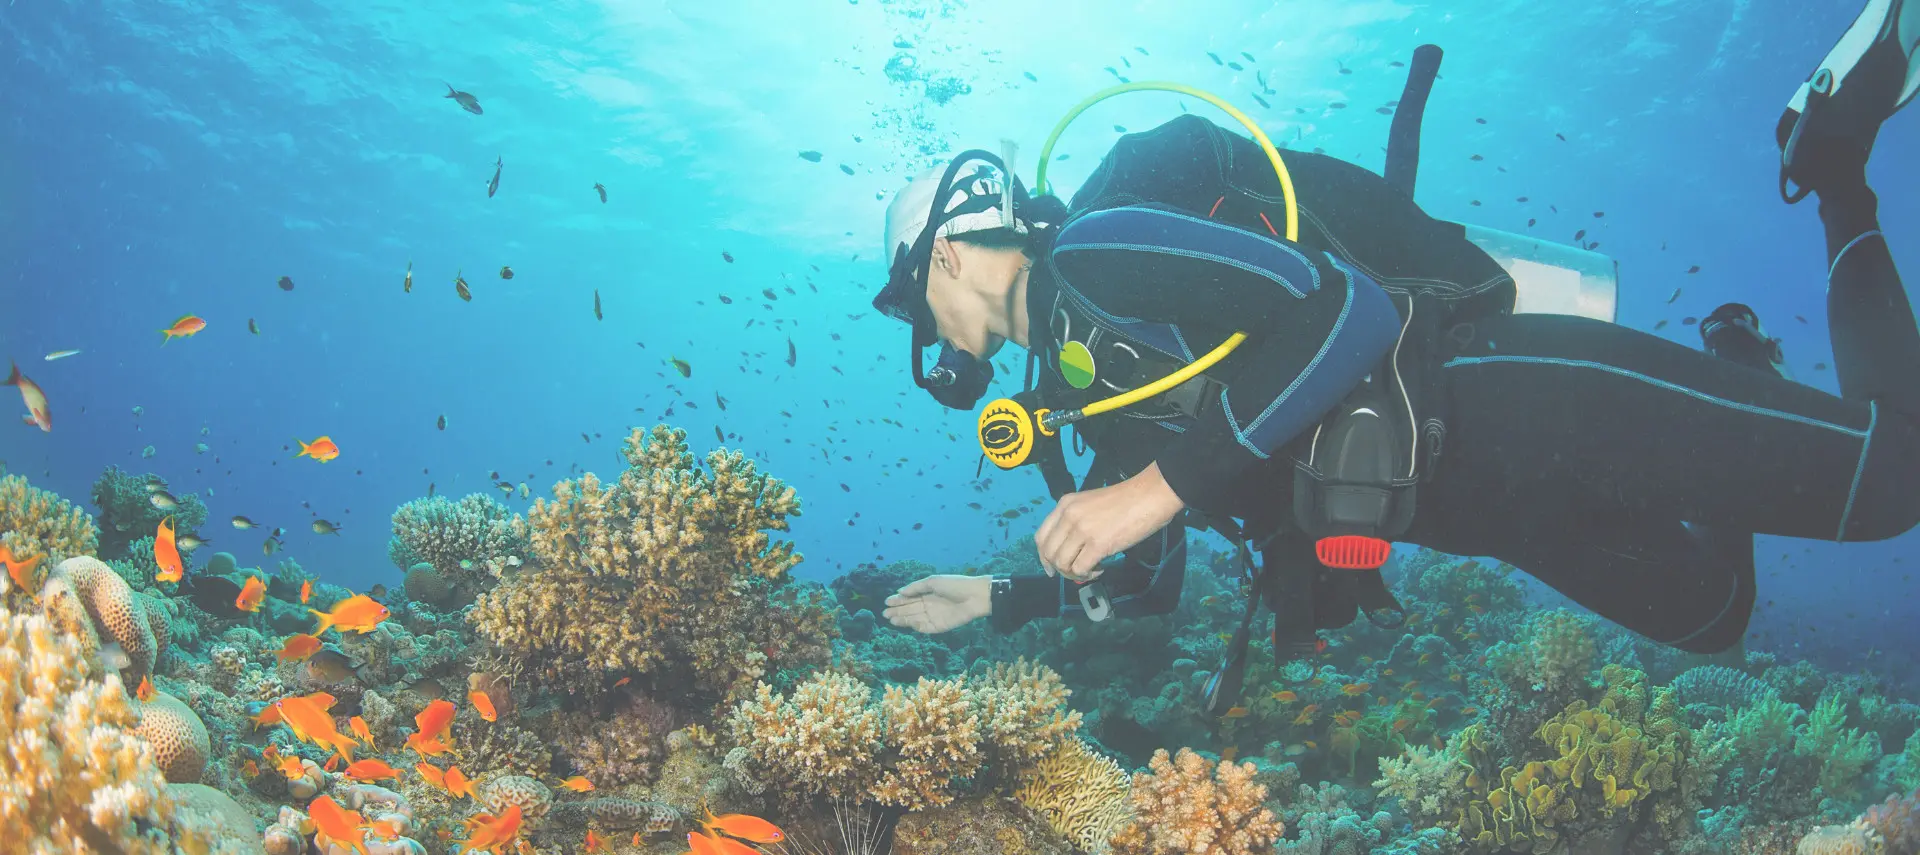 Image of a diver at a coral reef